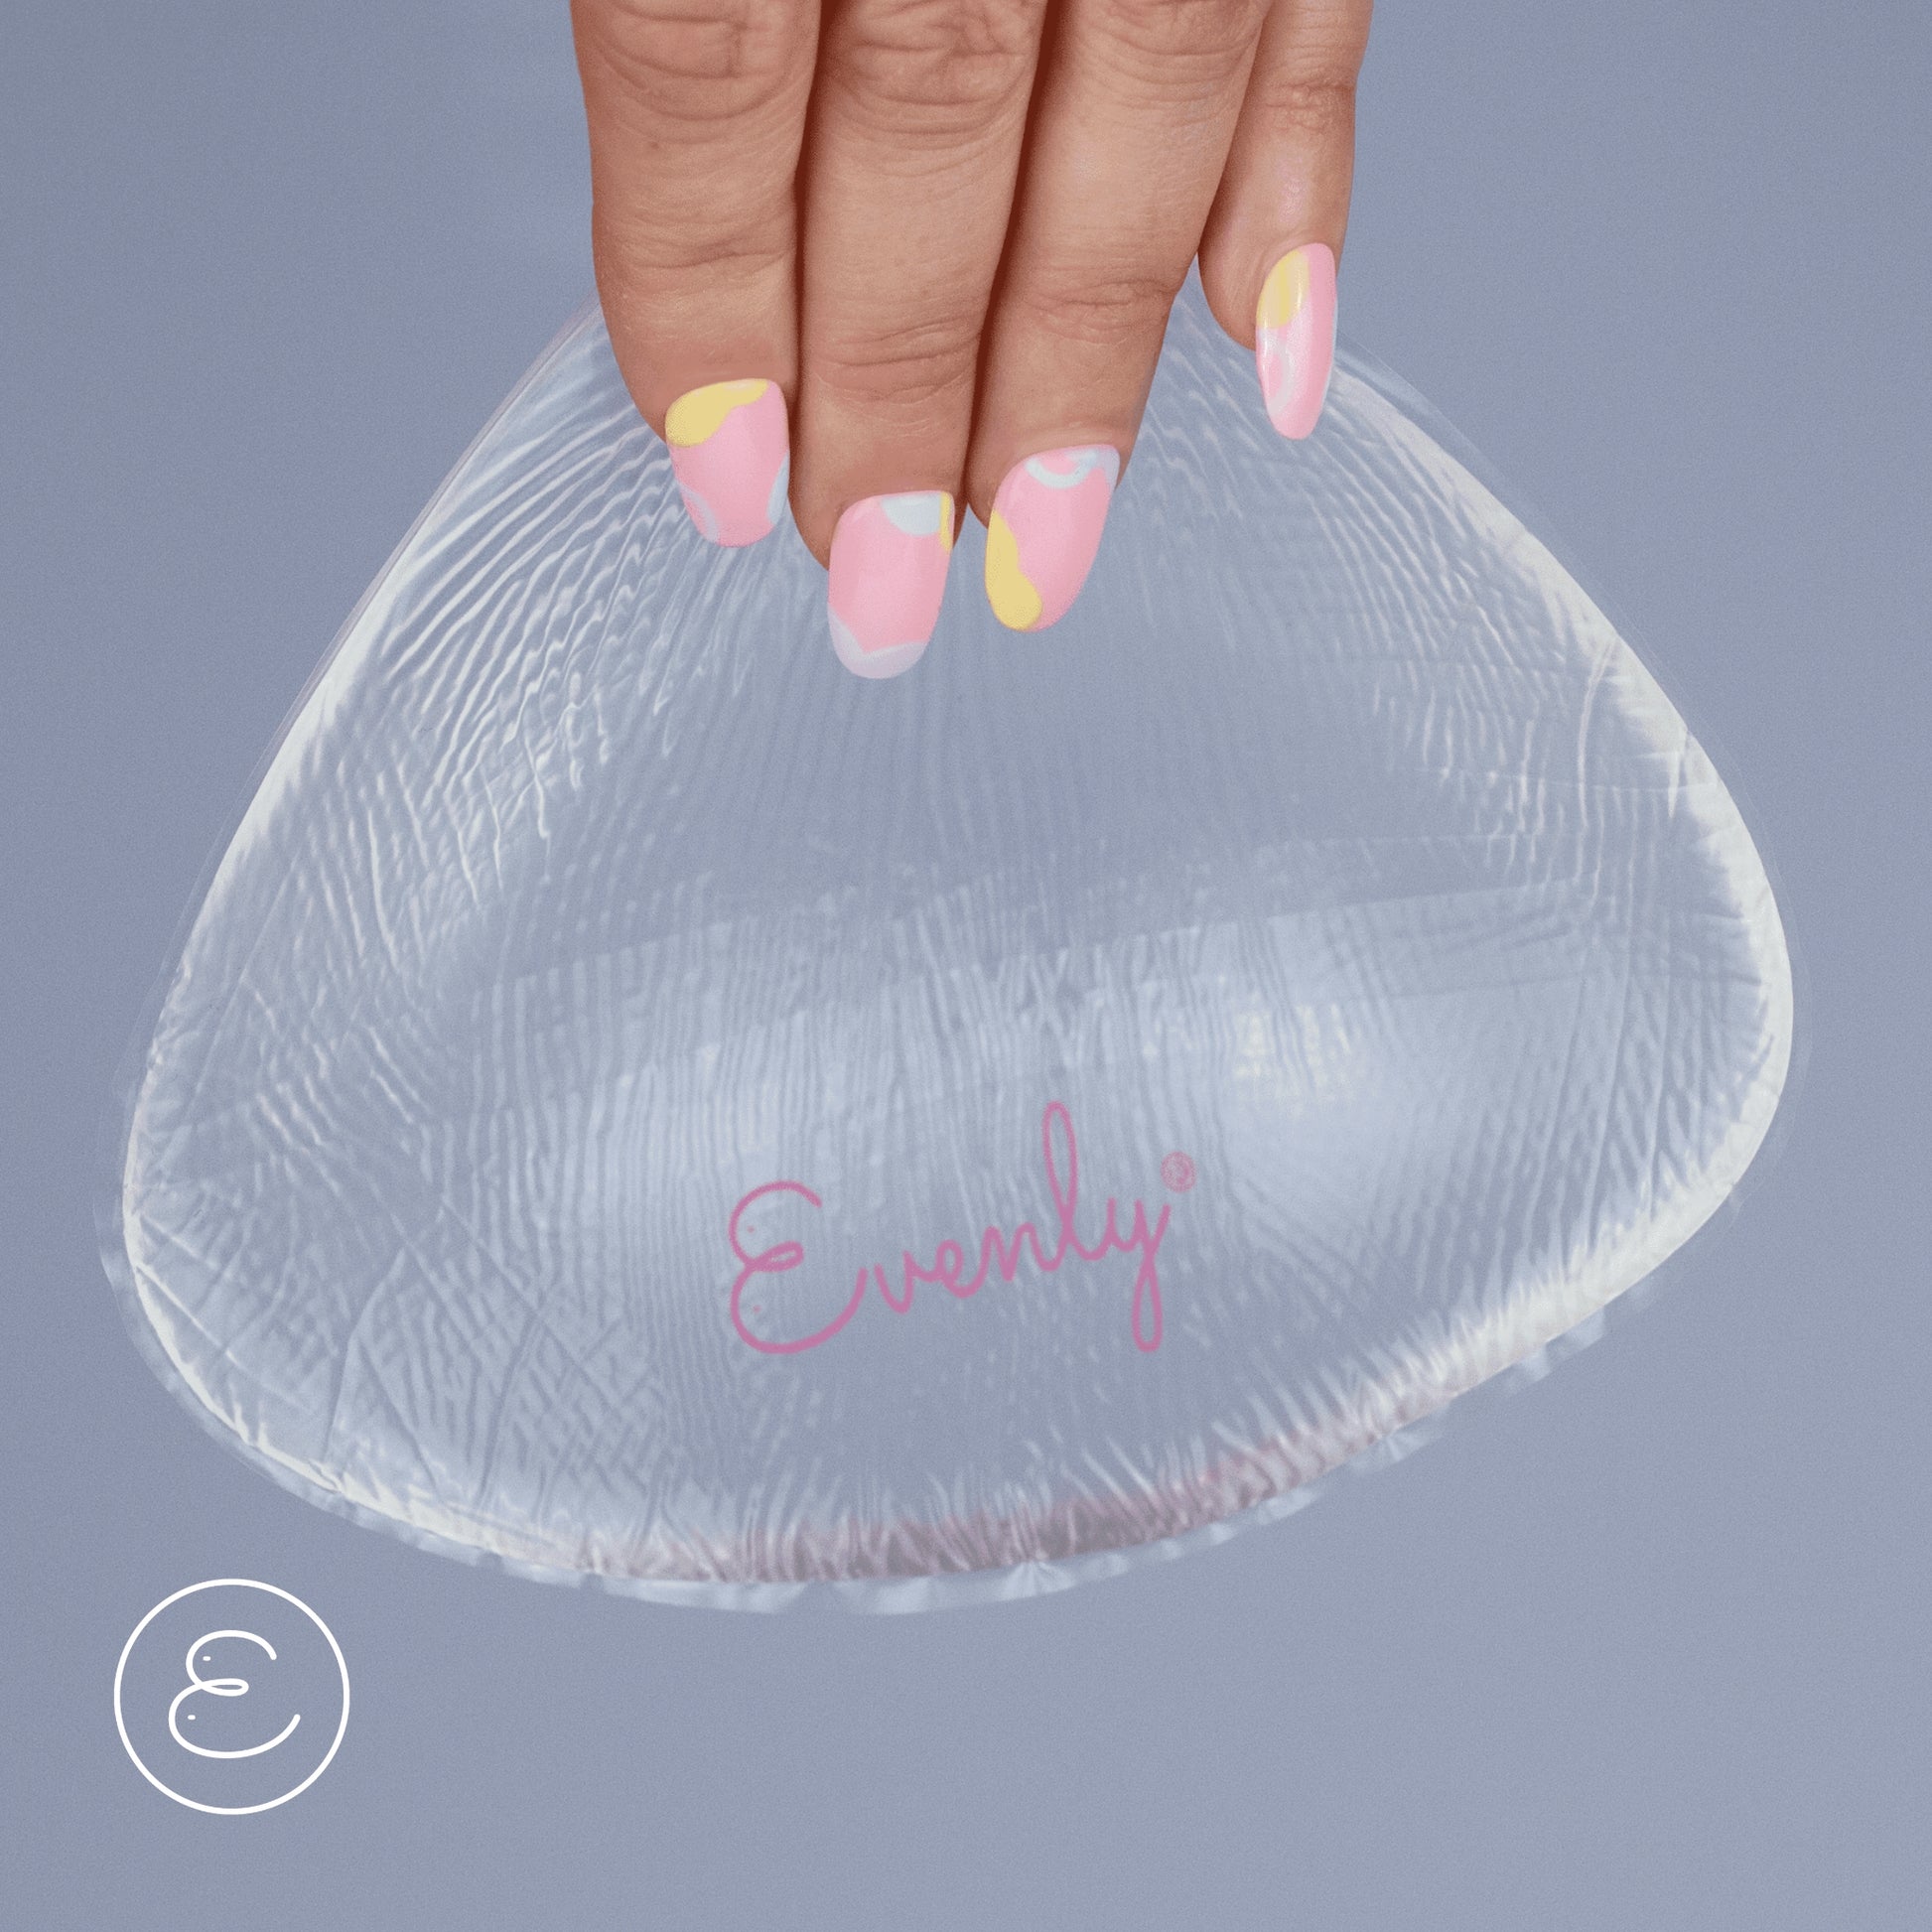 Evenly Bra Balancers for breast asymmetry - lightweight silicone balancers for a symmetrical appearance. Restore confidence, alleviate discomfort, and achieve even weight distribution. Ideal for everyday wear, swimming, and exercising. Available at The Fitting Service